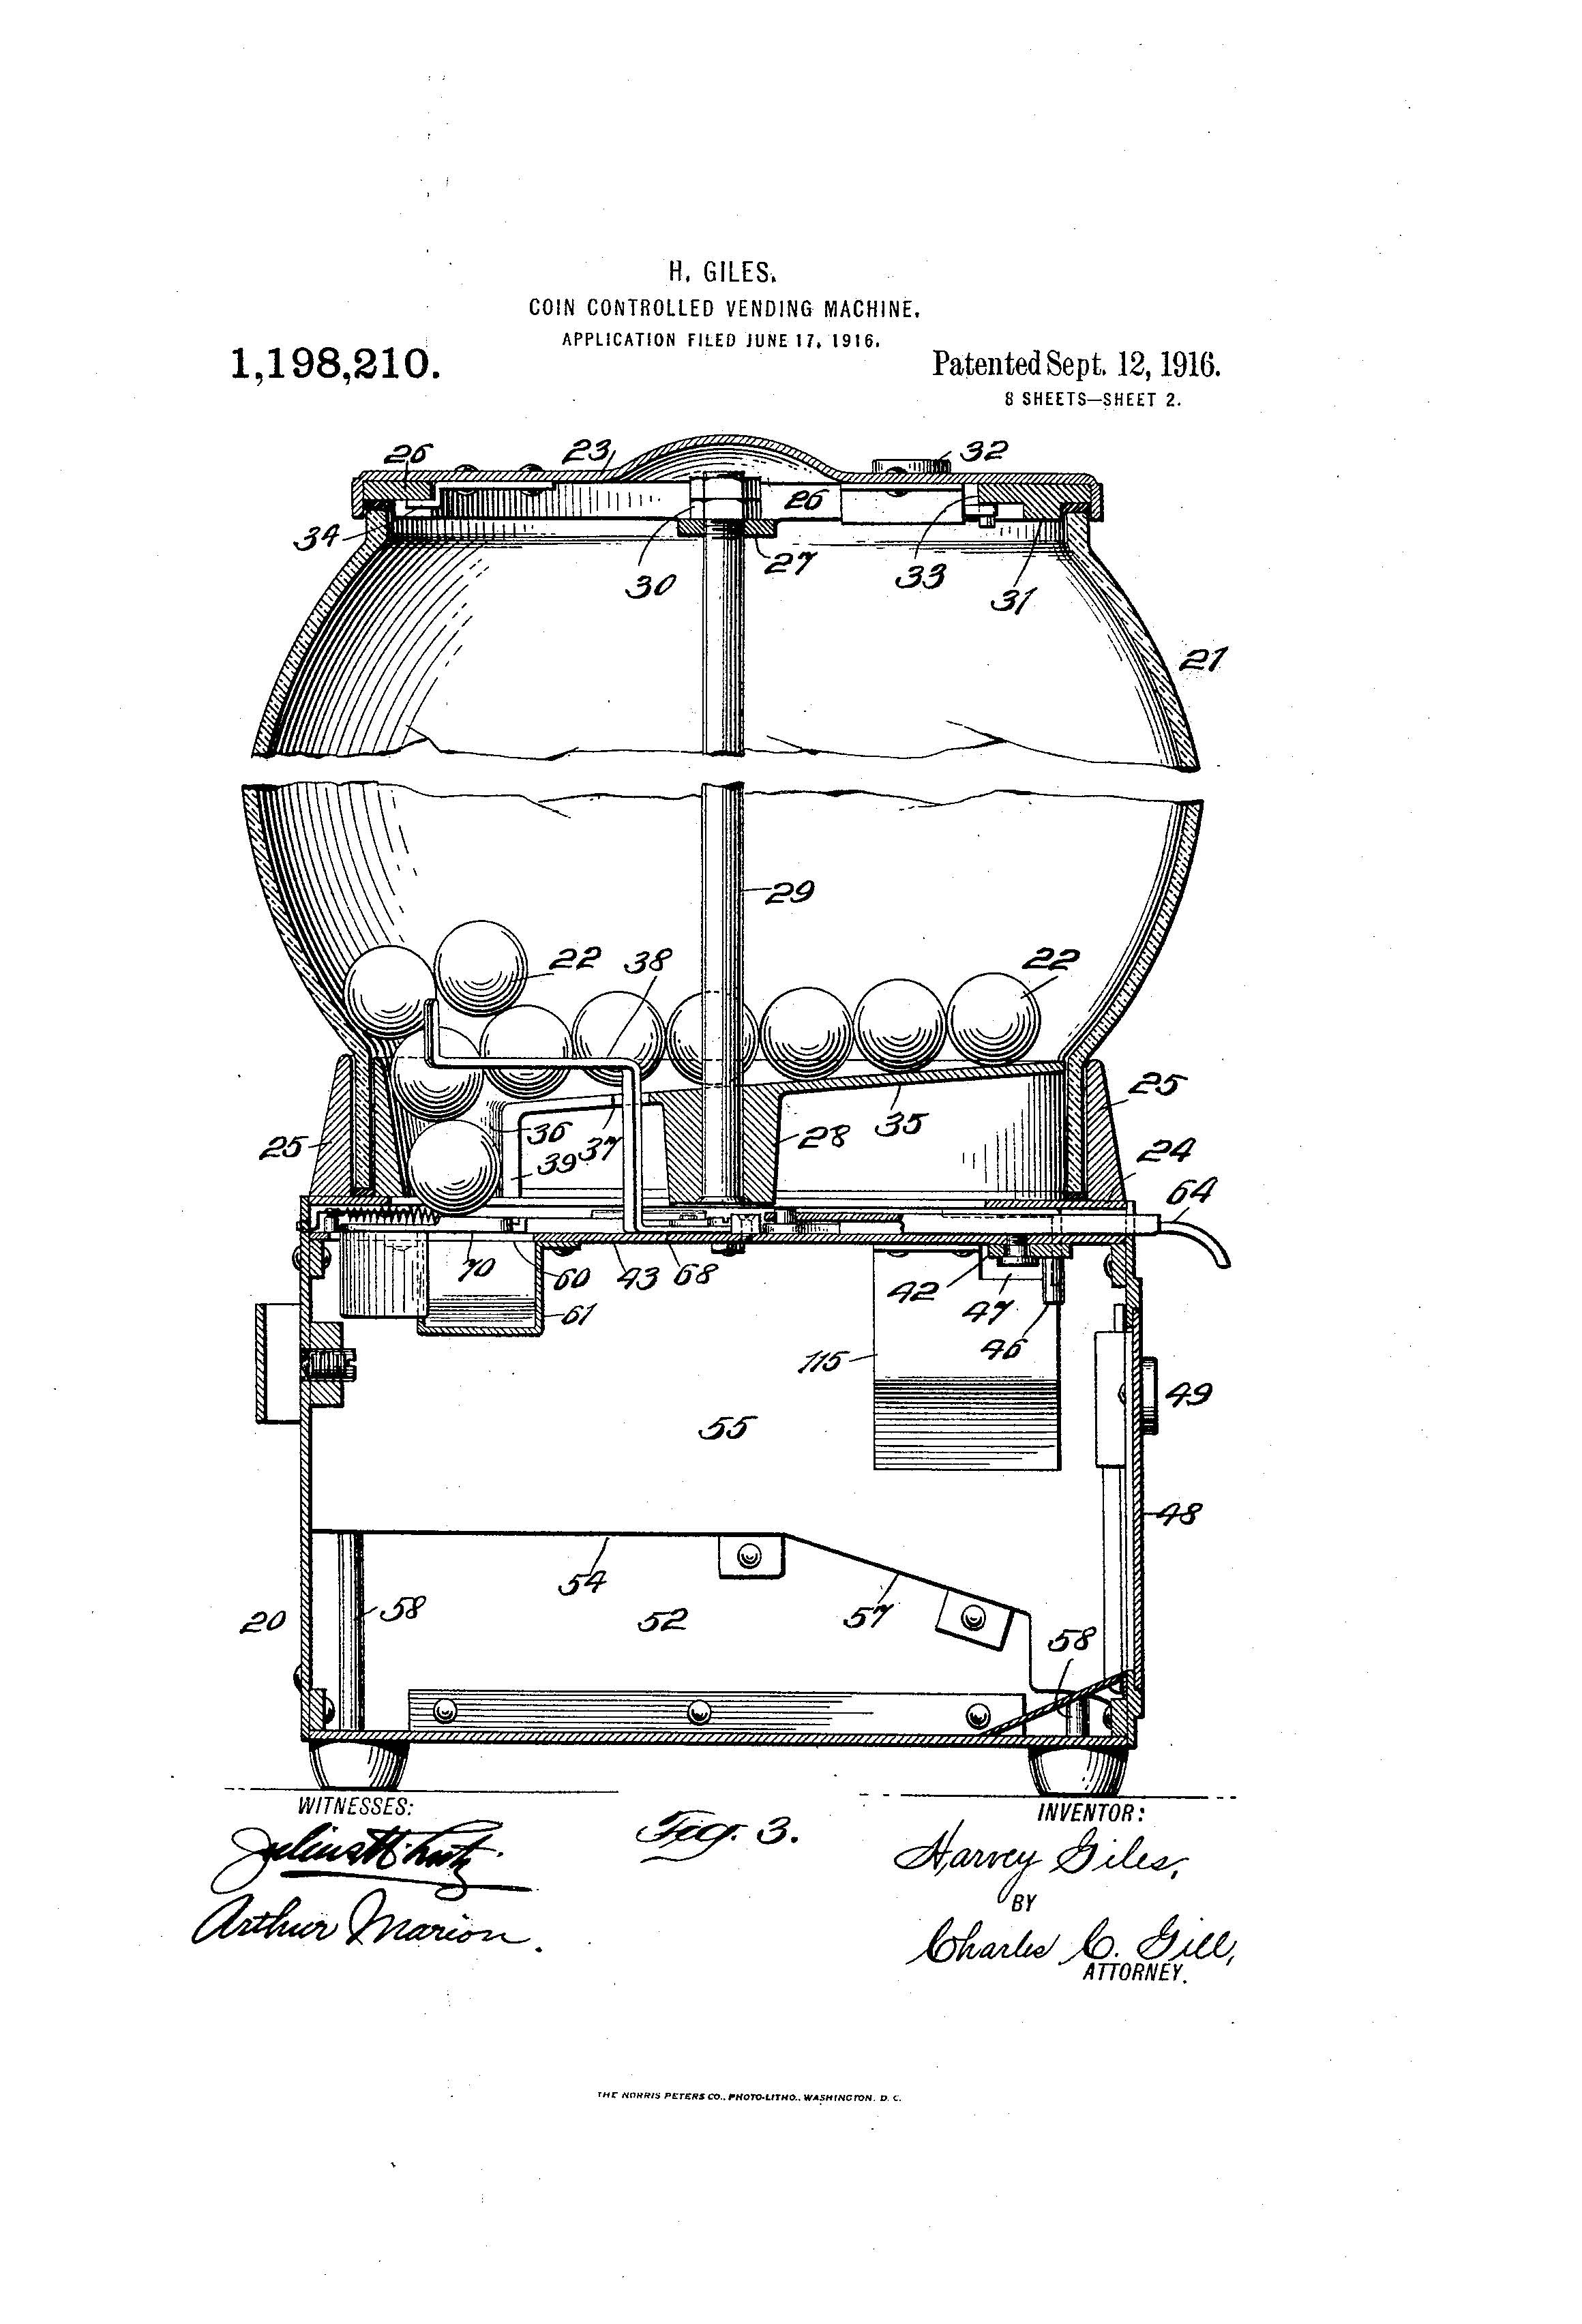 patent-illustration-coin-controlled-vending-machine_page_2